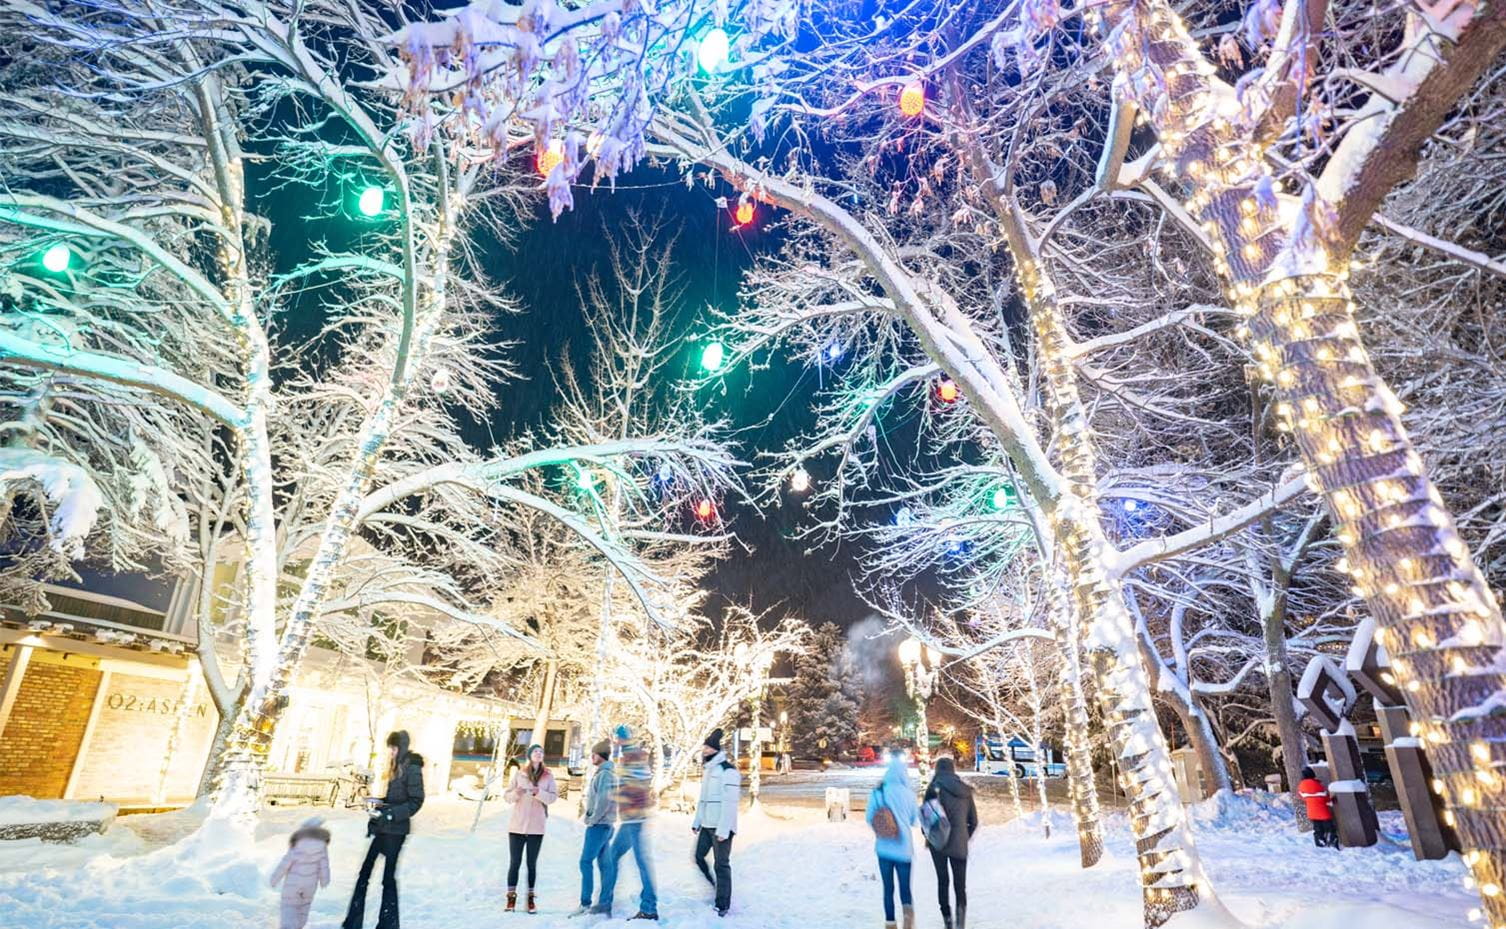 a group of people walking in a snowy area with trees and lights